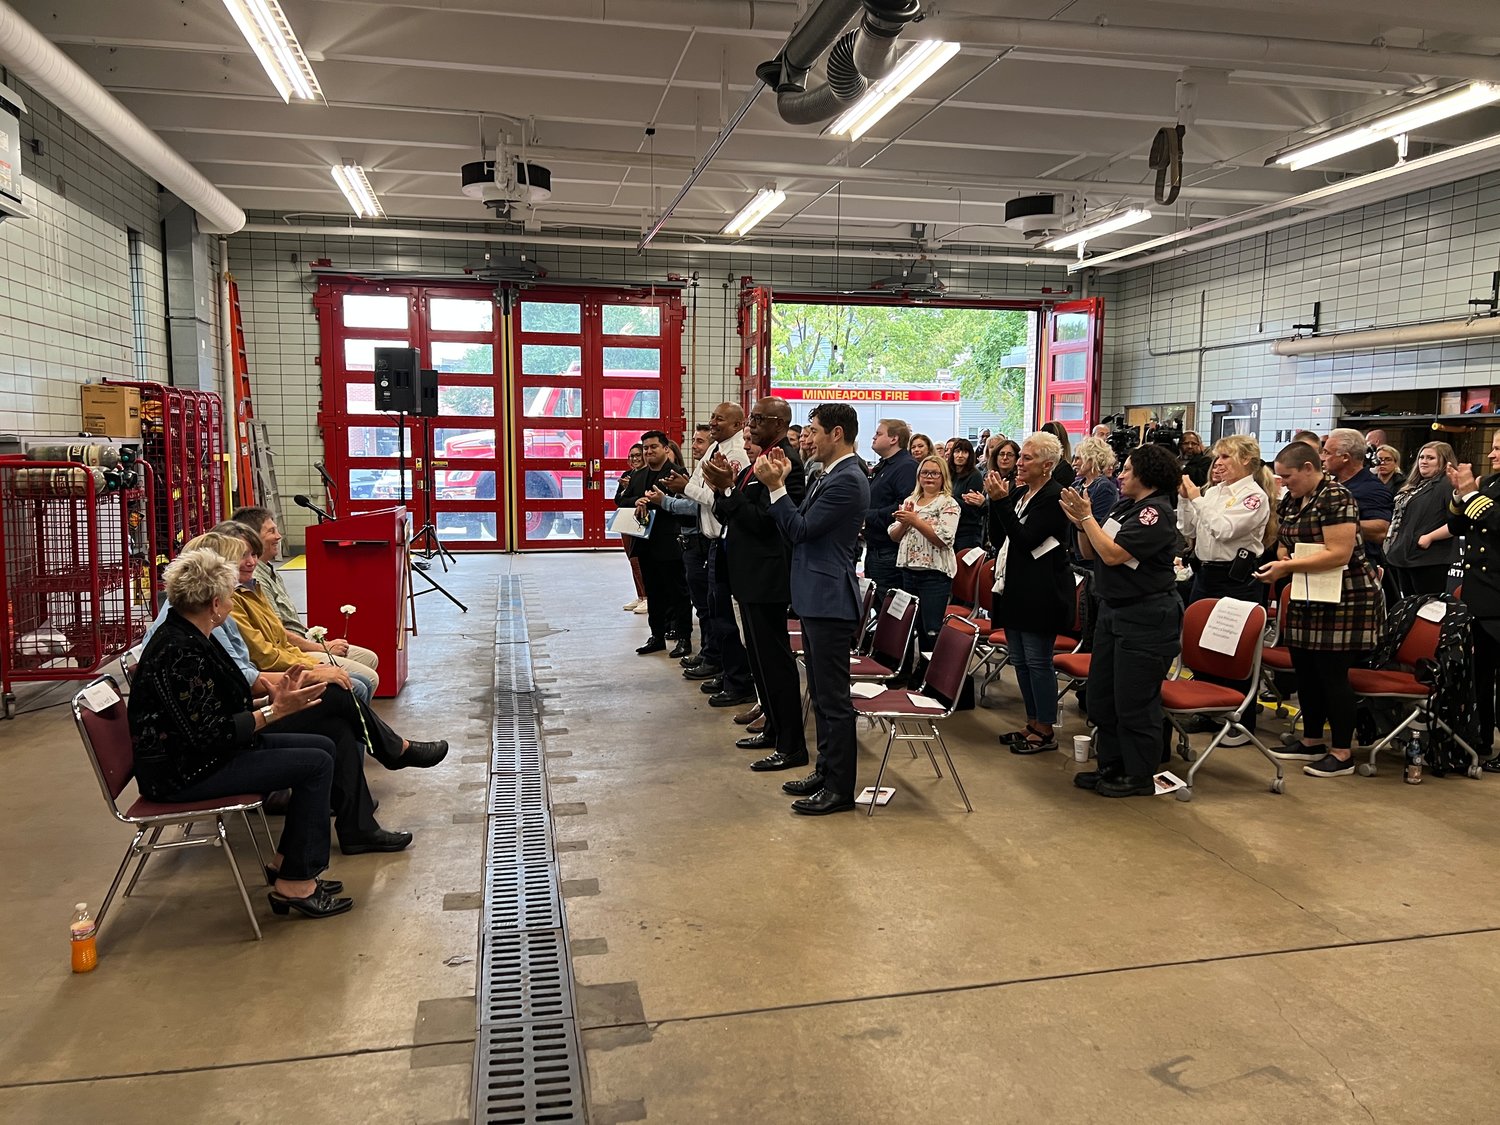 The four members of Minneapolis Fire Department’s first ever all-women crew receive a standing ovation at a Sept. 23, 2022, event commemorating the 30th anniversary of their time serving together.